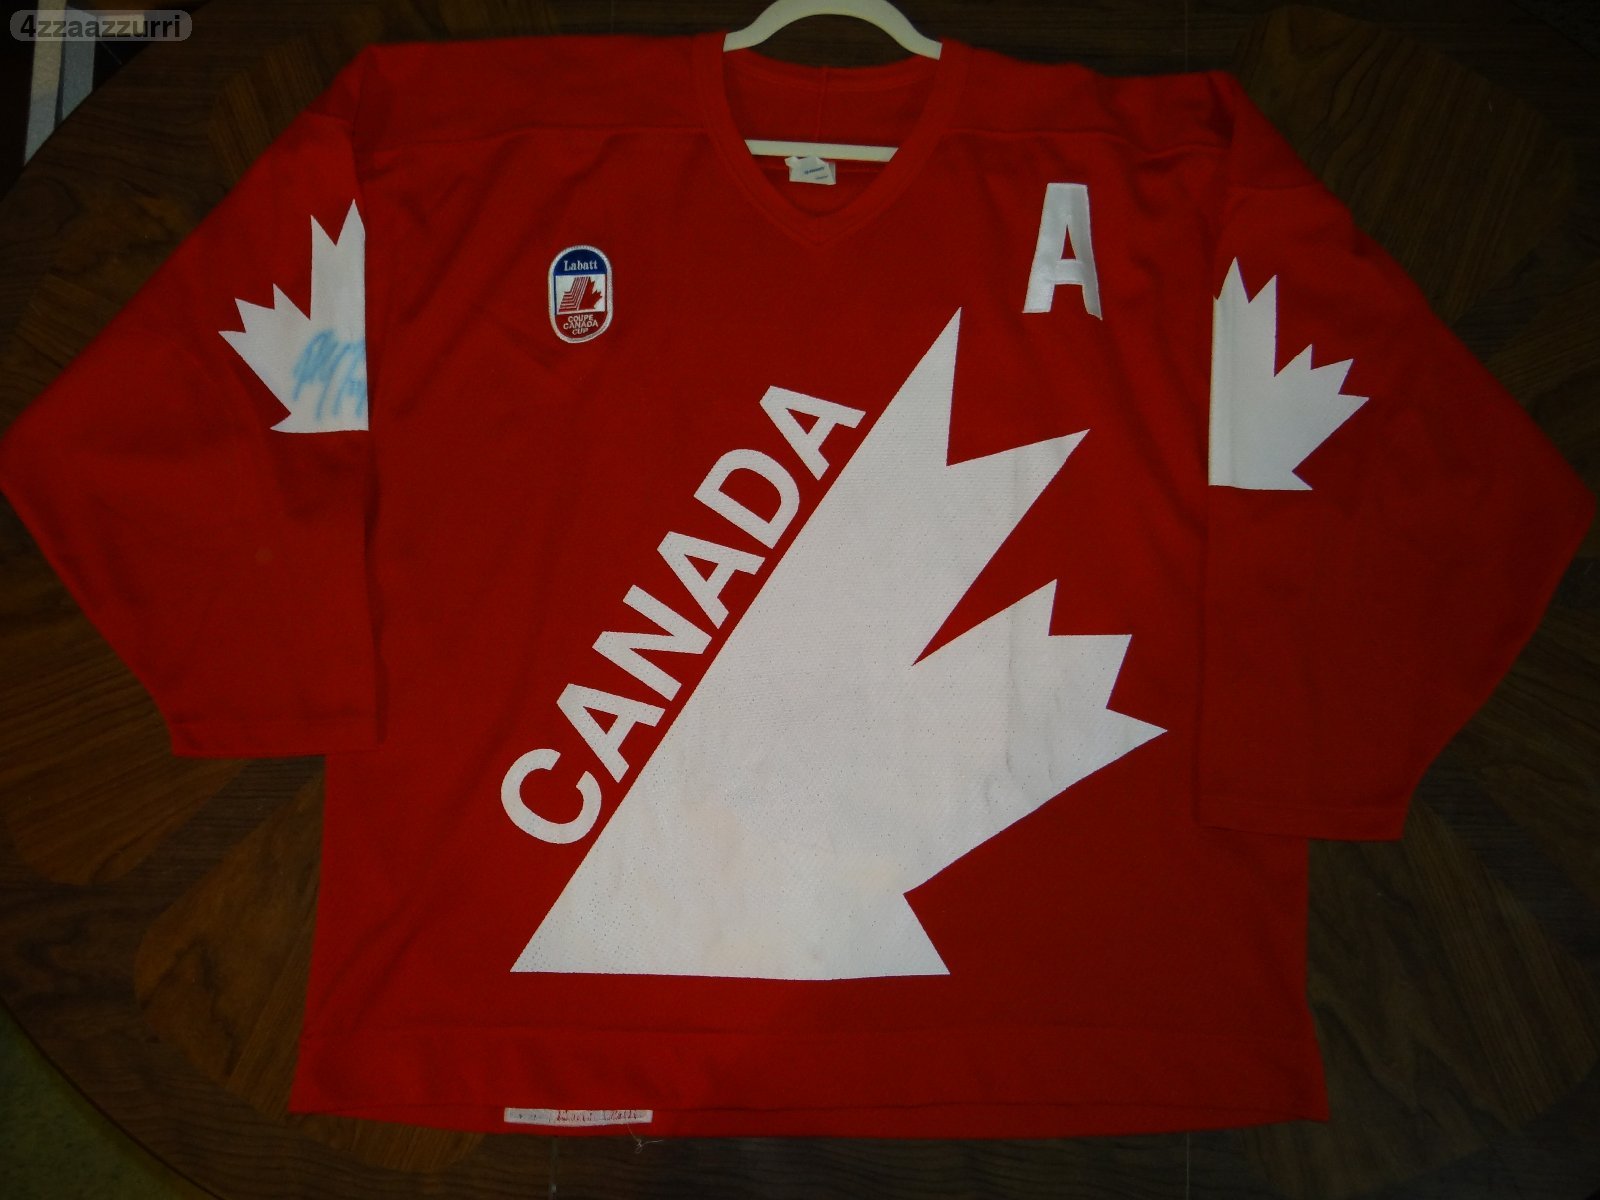 1987 canada cup jersey